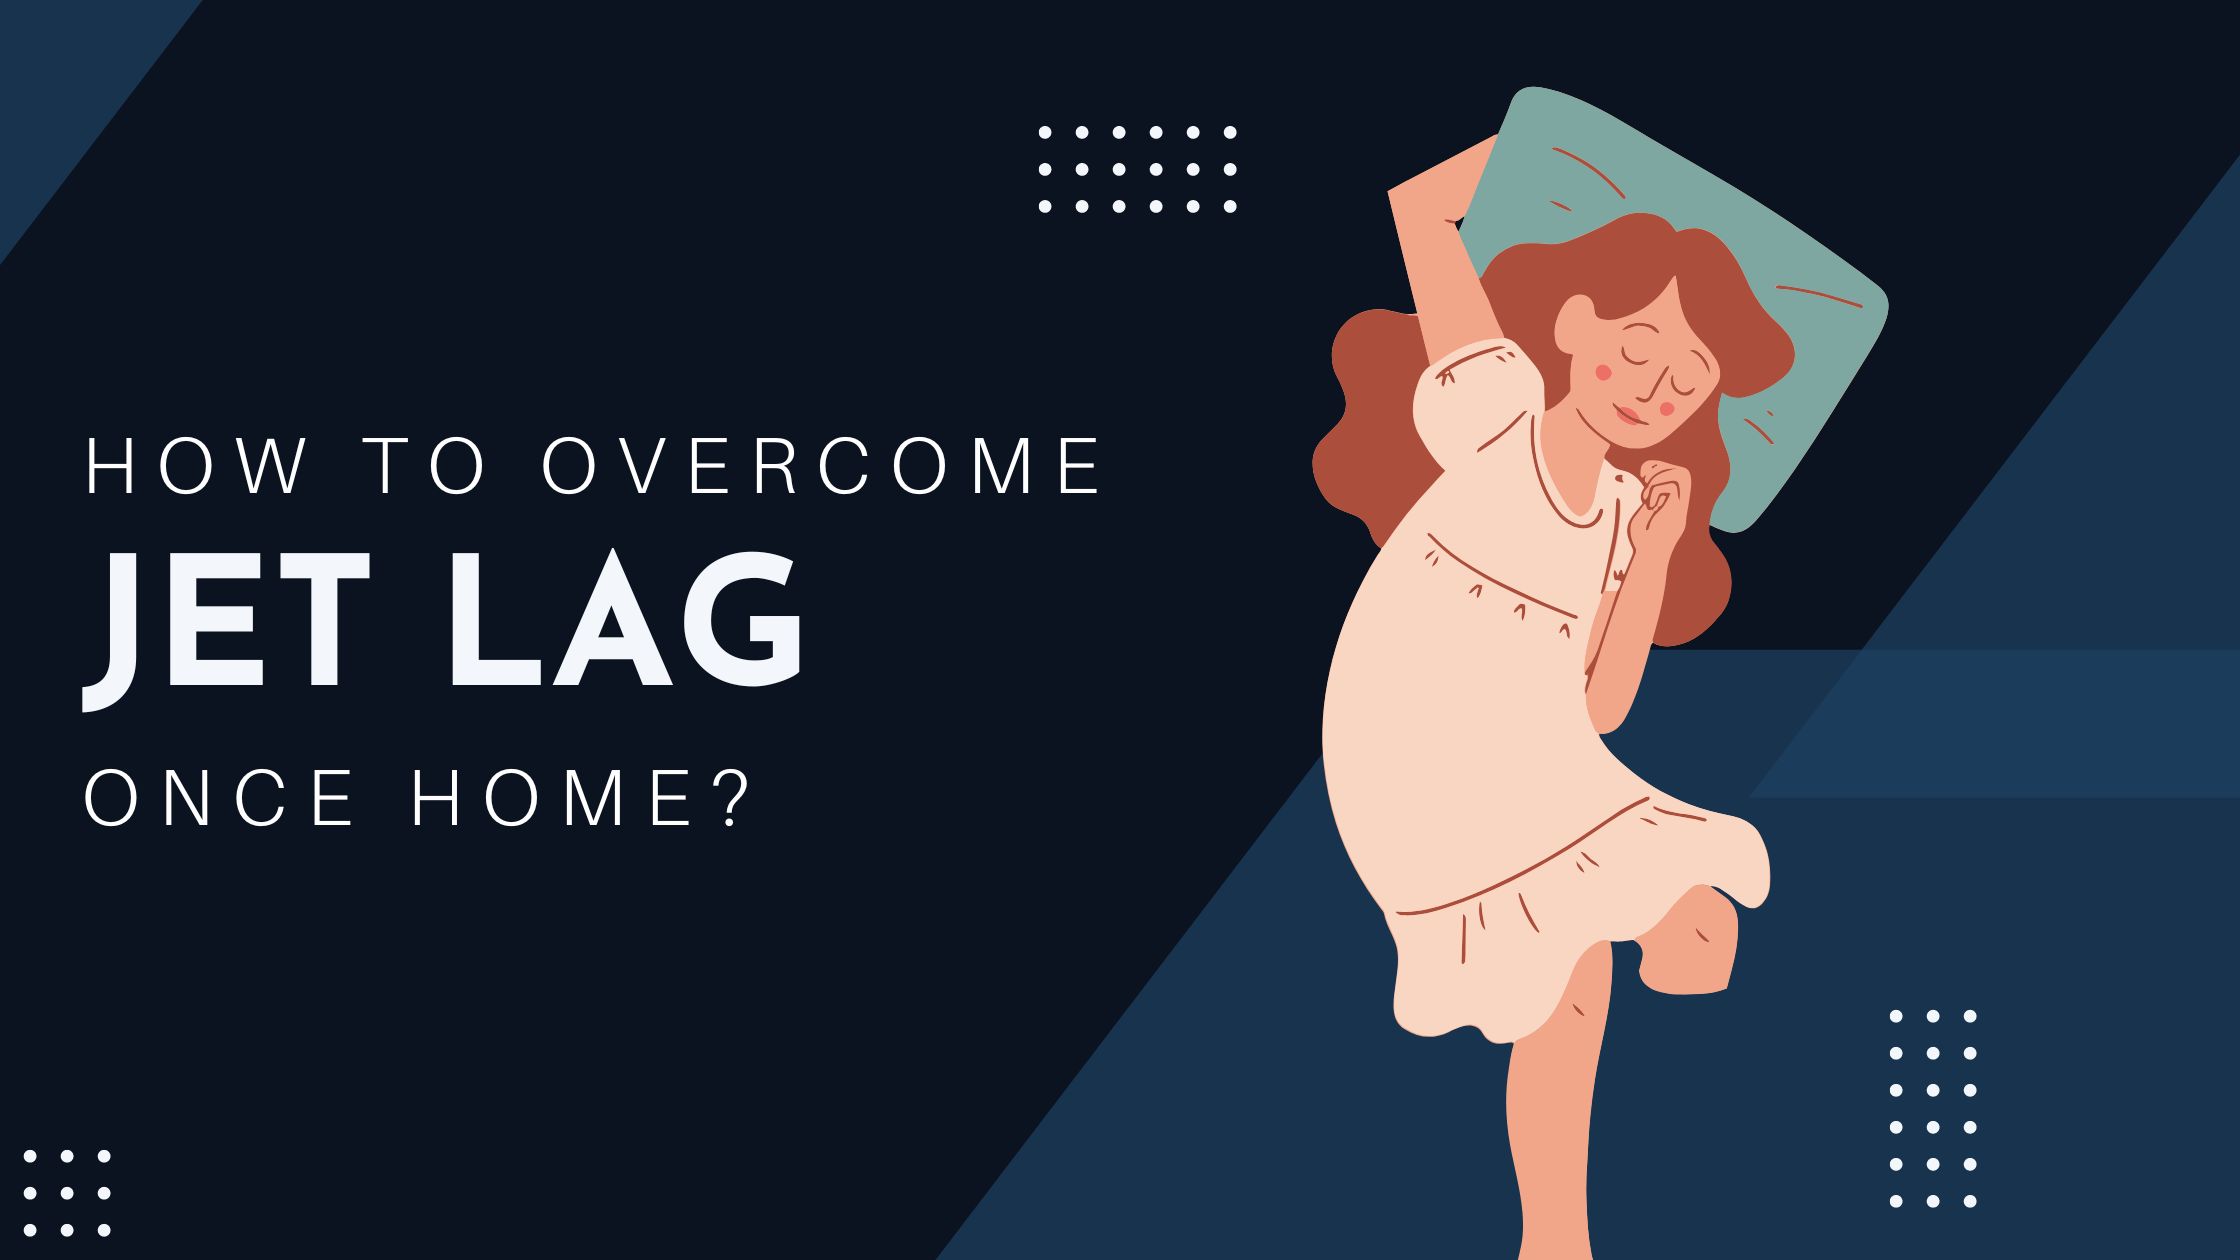 How To Overcome Jet Lag Once Home